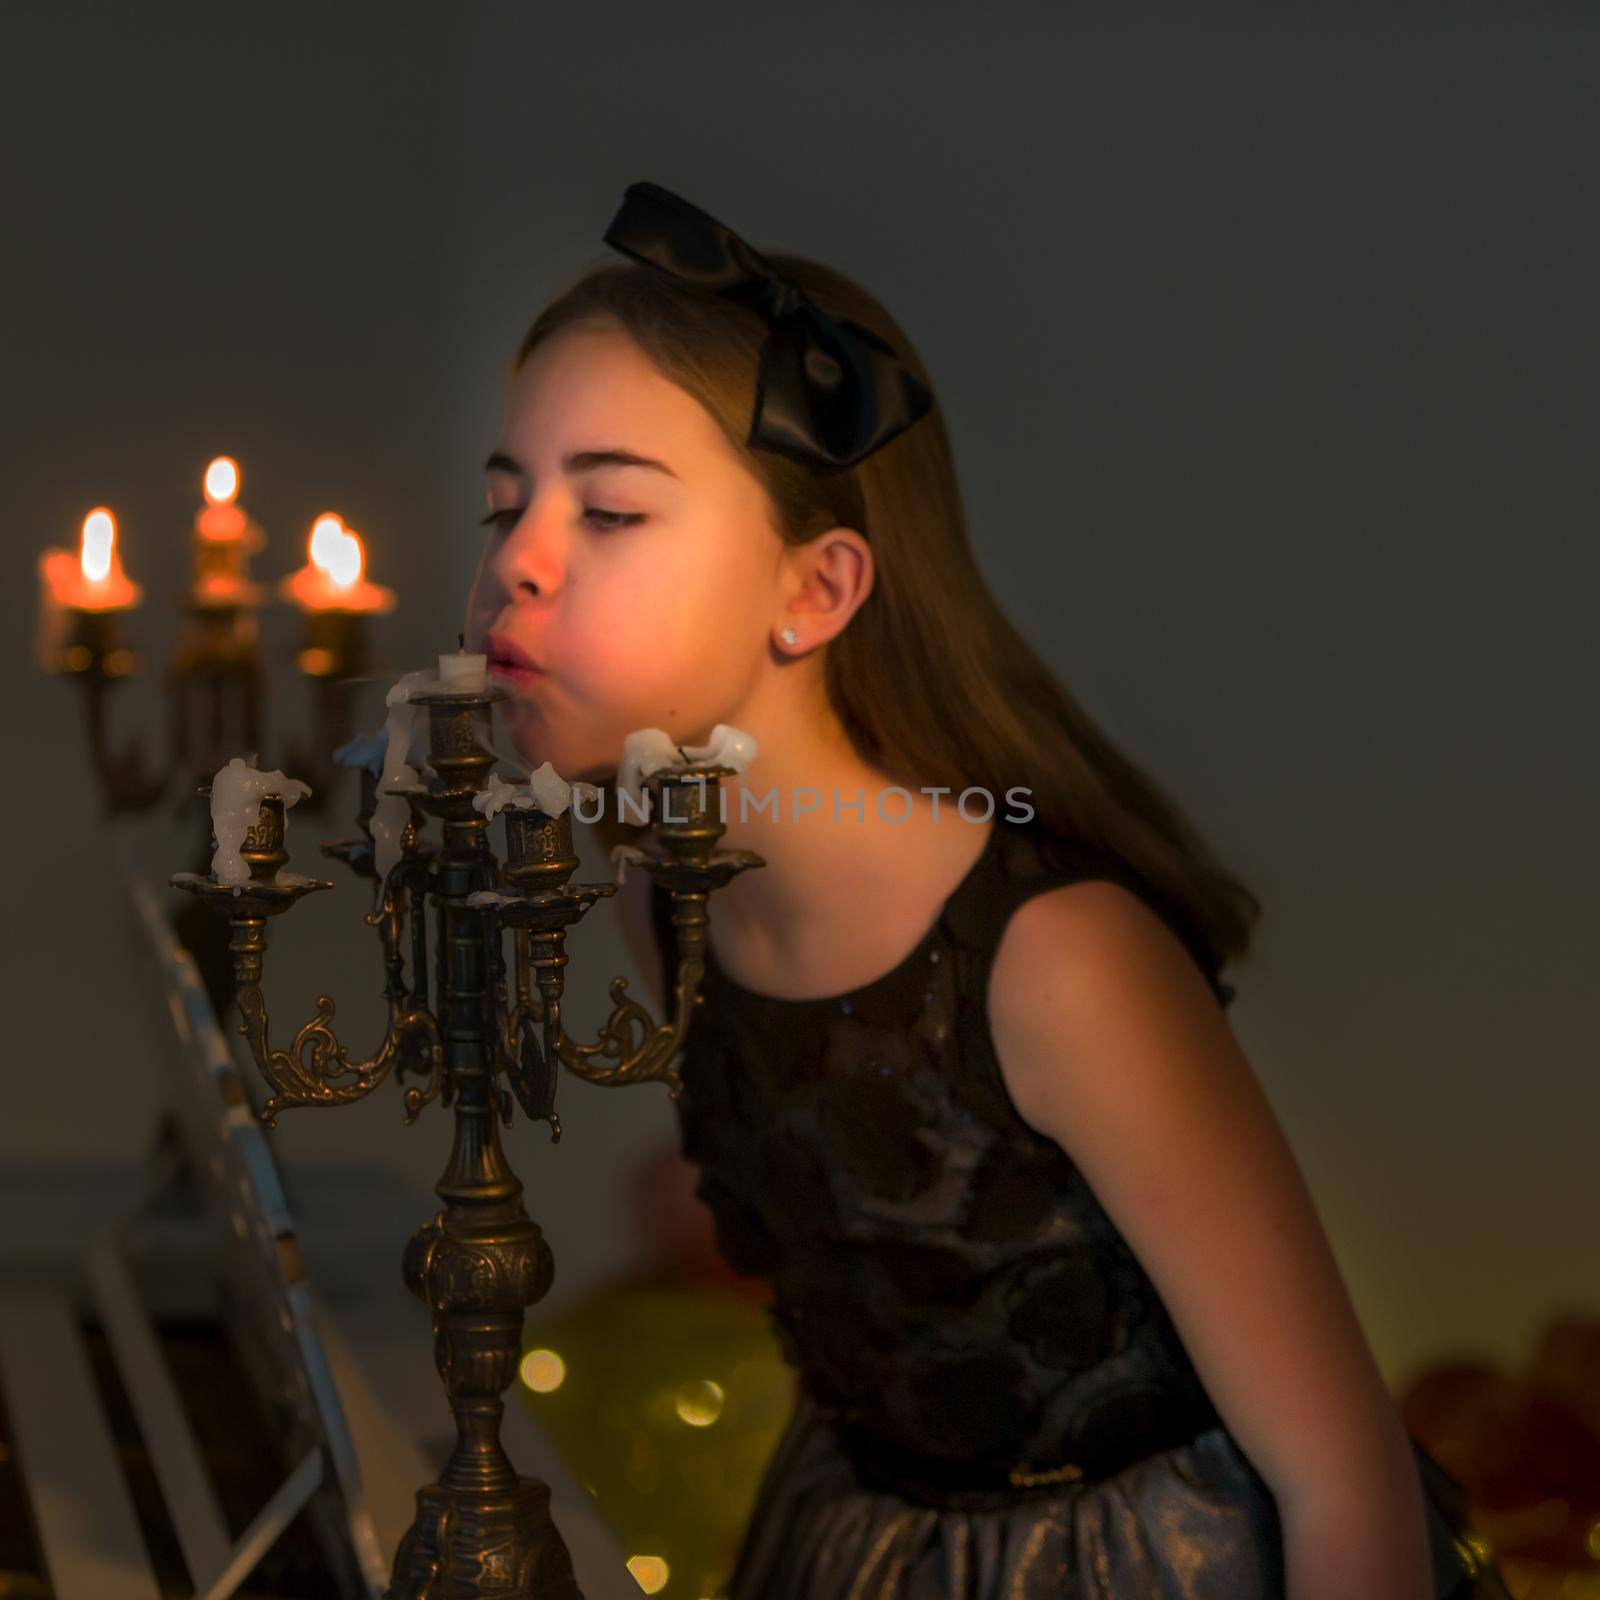 Beautiful Blonde Long Haired Girl Blowing out Candles in Vintage Chandelier, Side View of Charming Preteen Stylish Girl Sitting on Blurred Background Lighting by Warm Candle Light